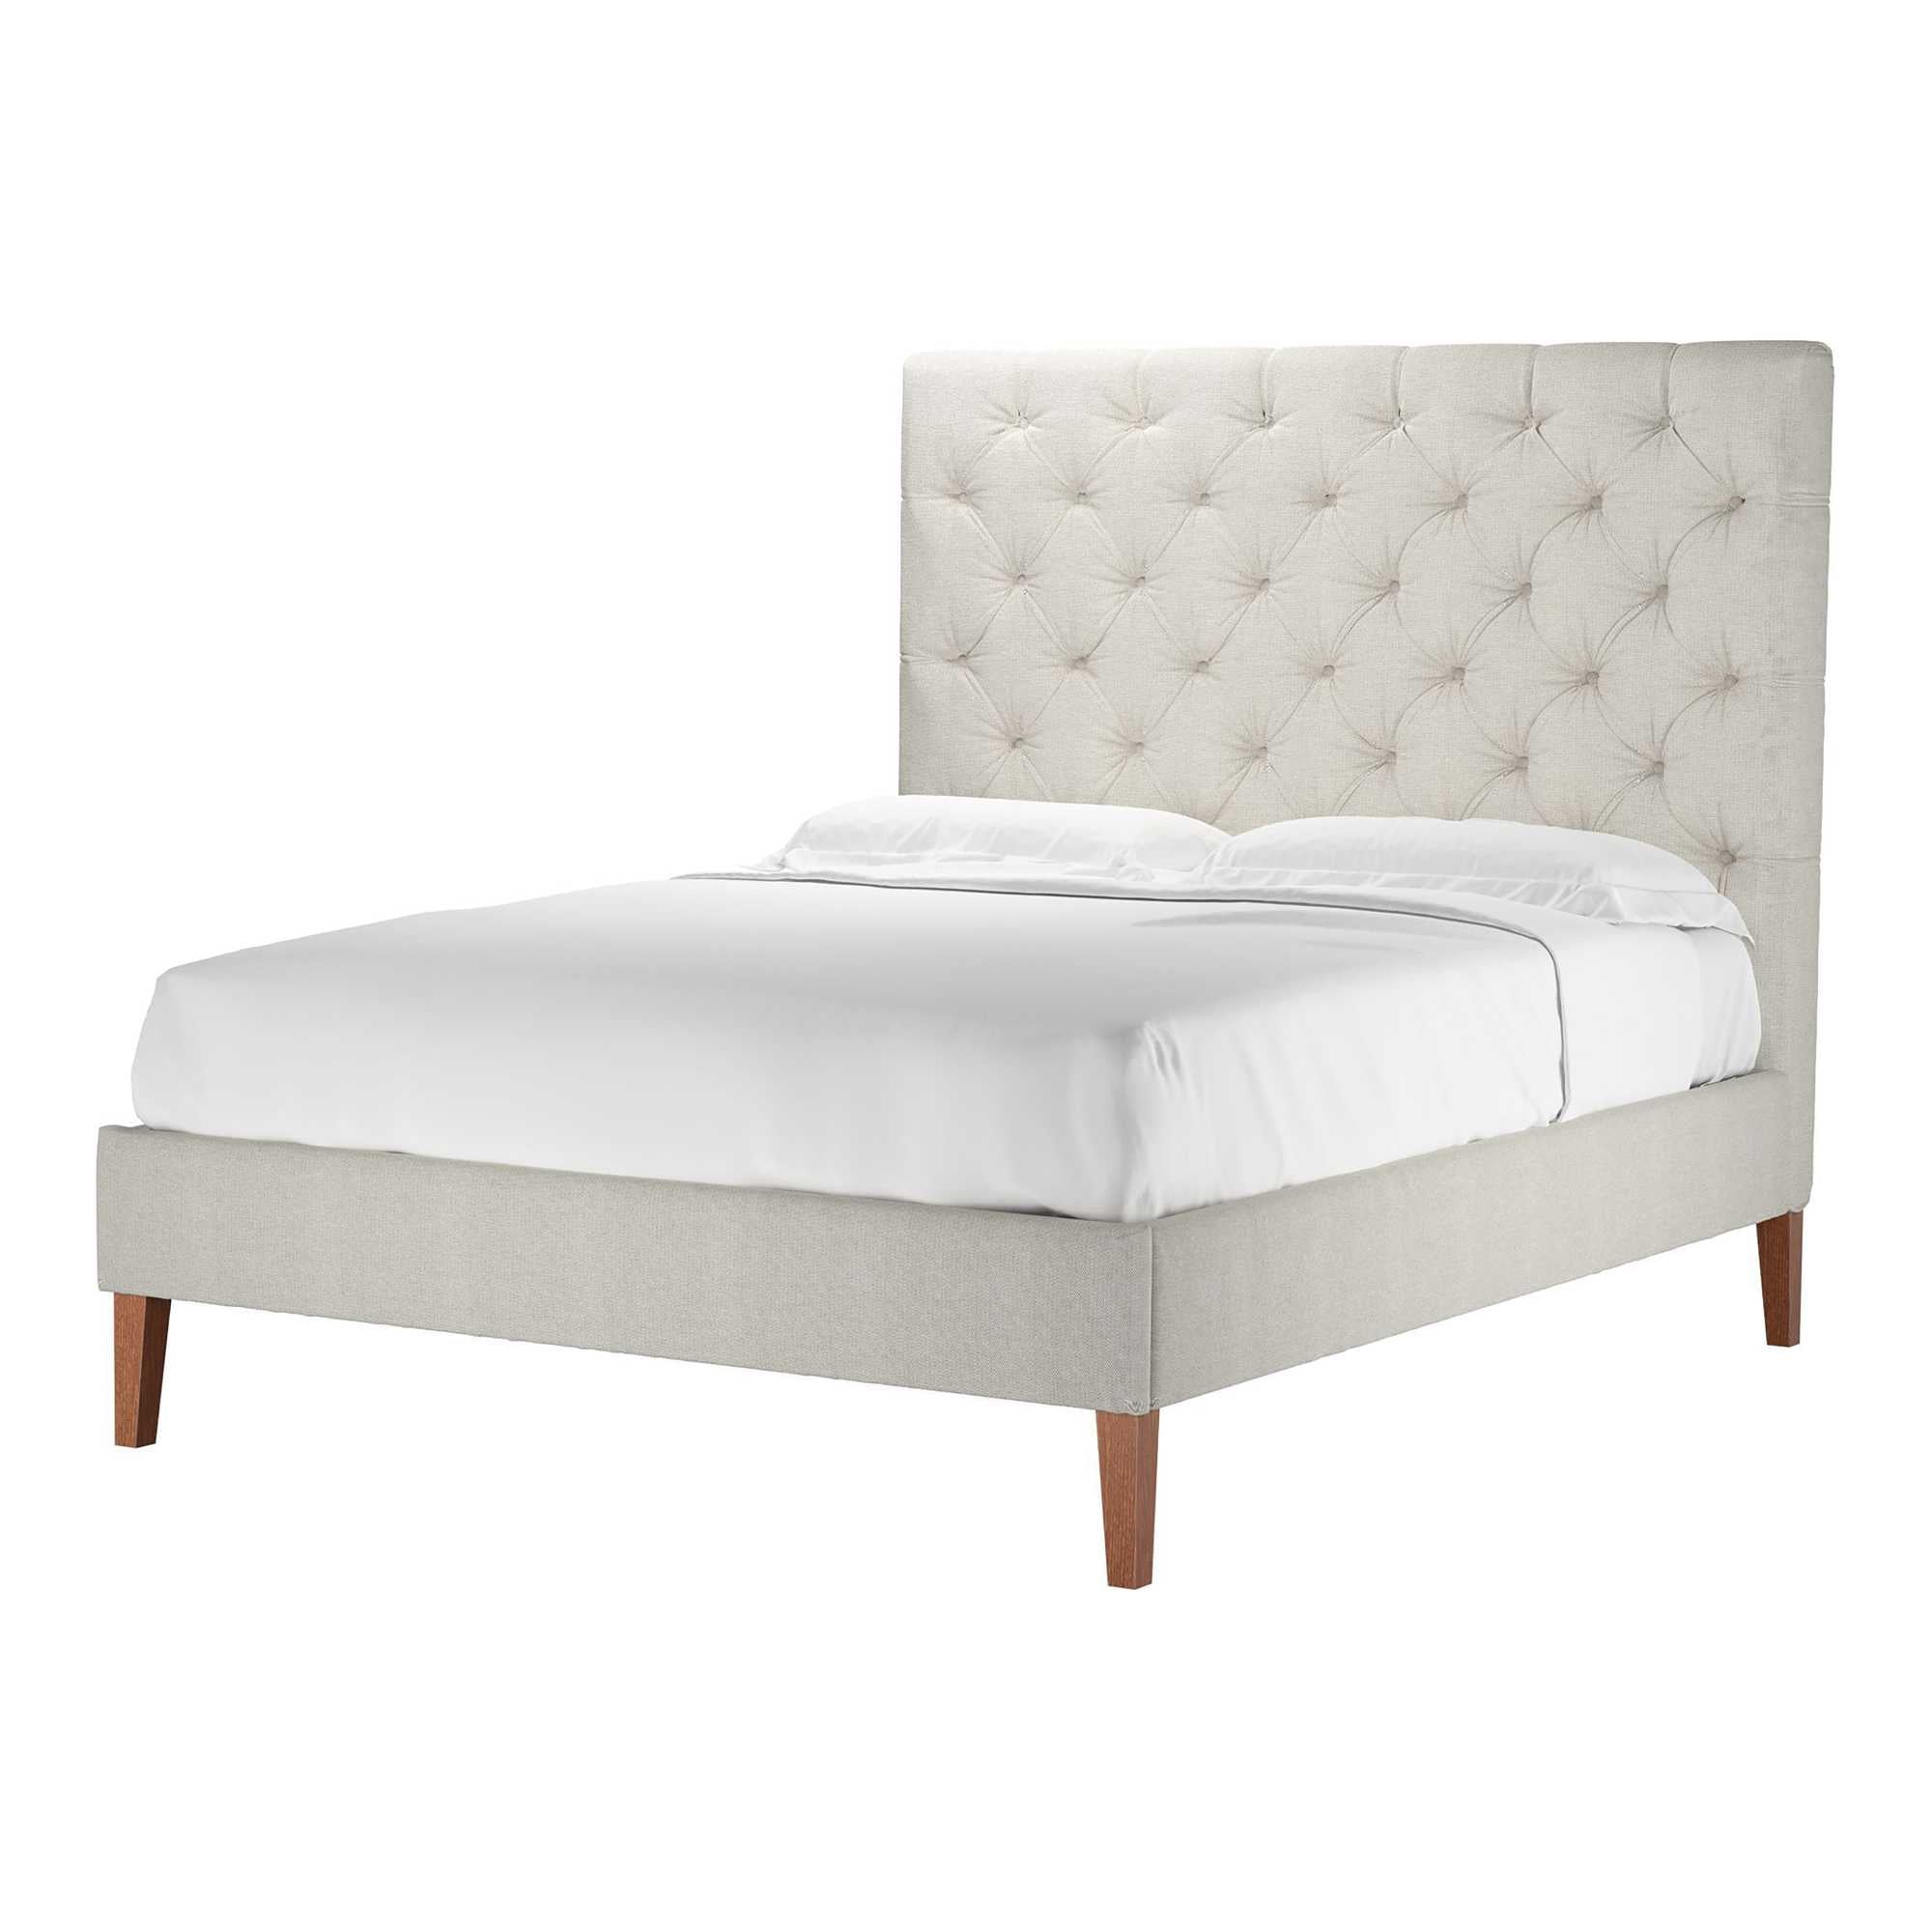 Rosalie Clay House Basket Weave Bed - King Size